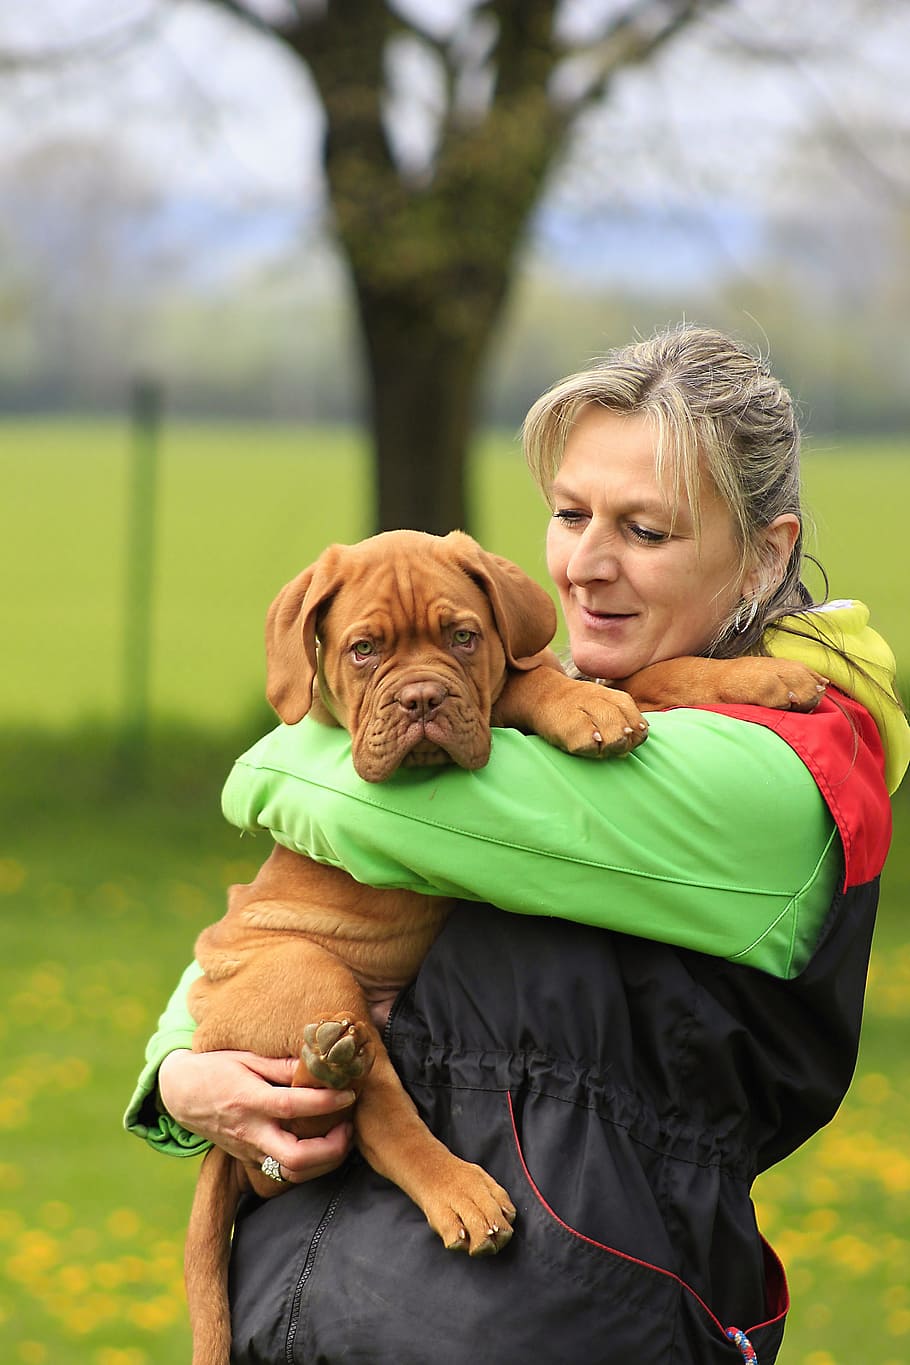 woman carrying mahogany French mastiff puppy, bordeaux, dog, dogue, mastiff, de, french, sunny, brown, summer, animal, pet, canine, nature, grass, outdoors, purebred, young, funny, puppy, mammal, breed, head, cute, park, HD wallpaper